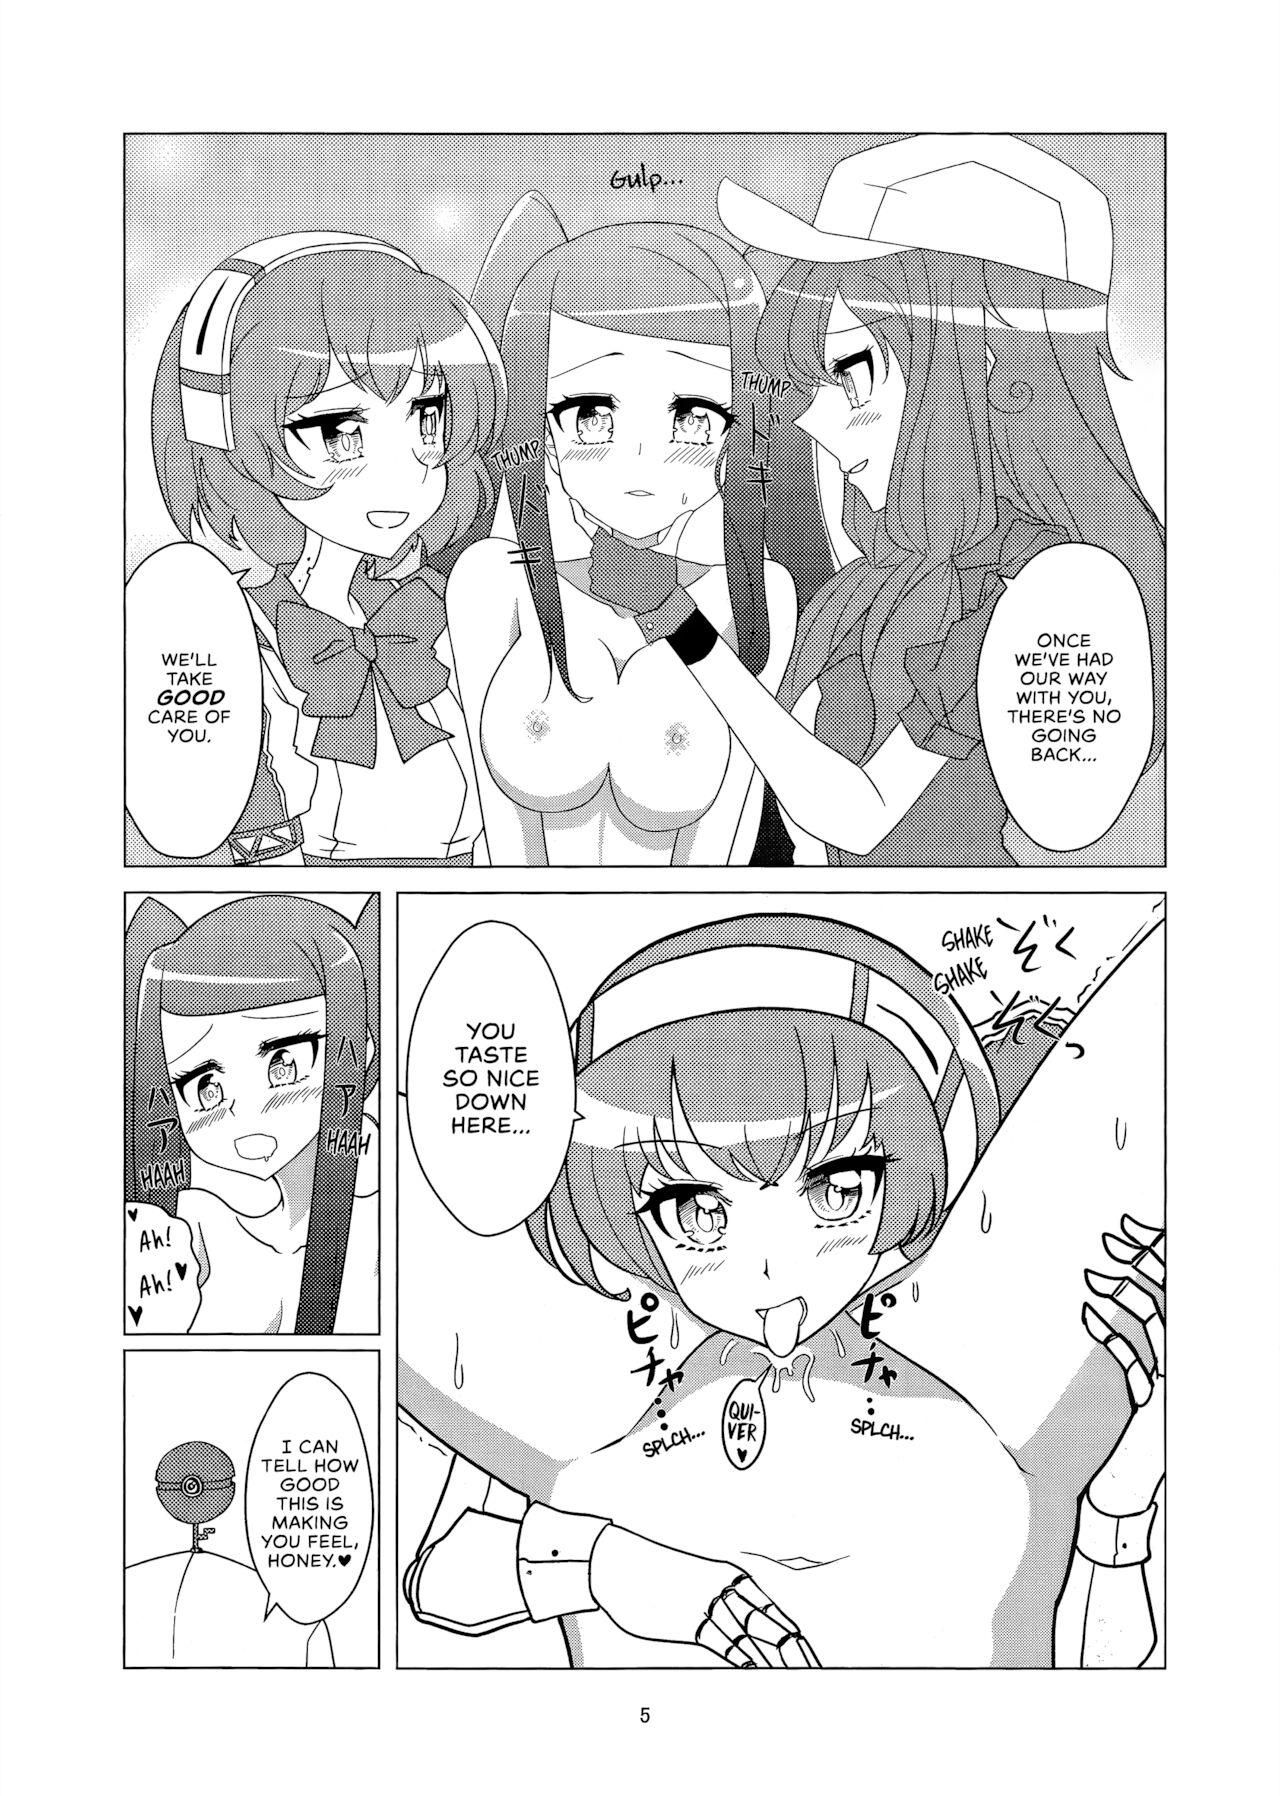 Spit Angel's Share - Va-11 hall-a Pussy - Page 4